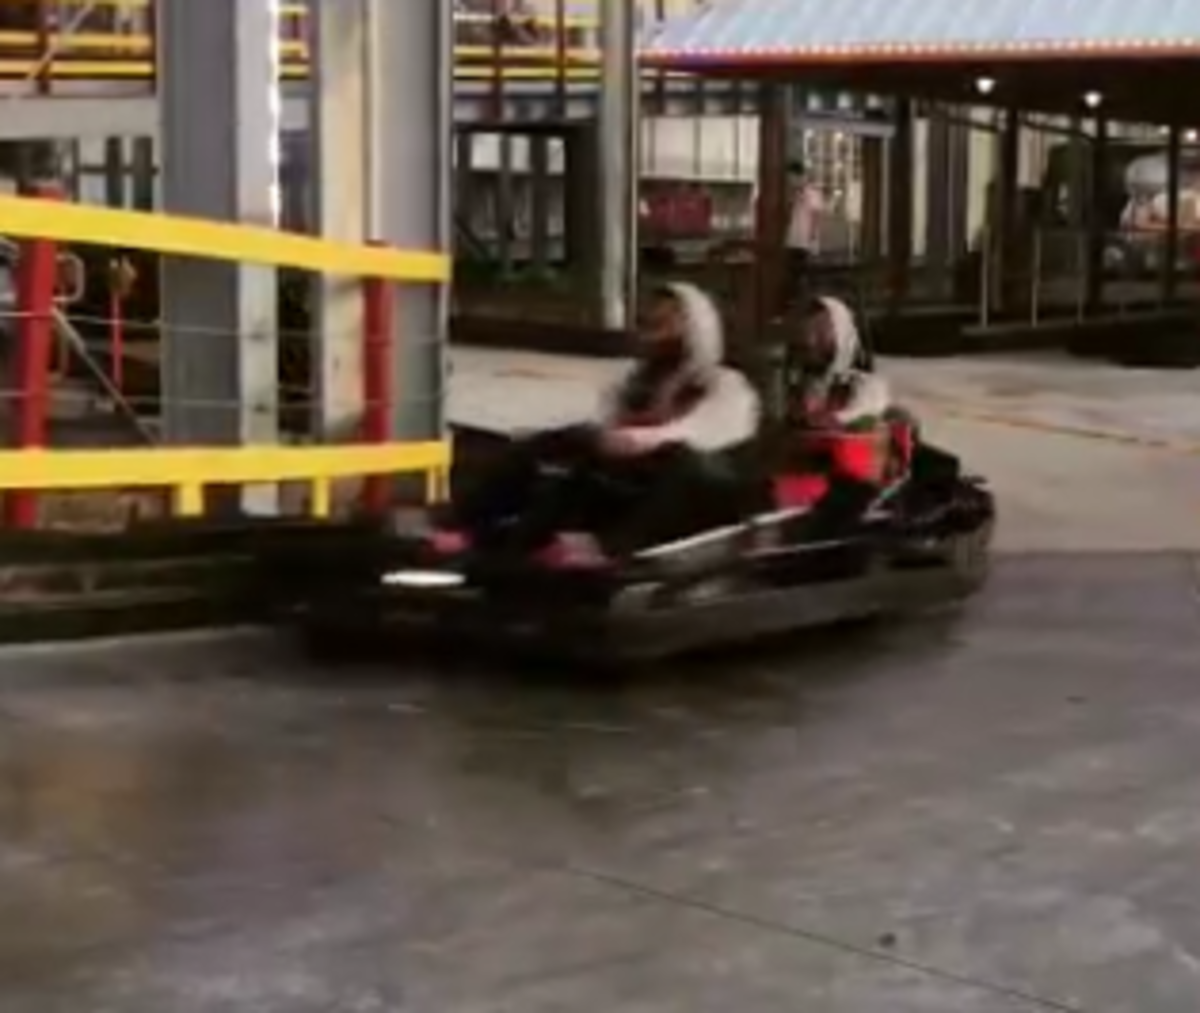 Tennessee Football players go Go Karting.